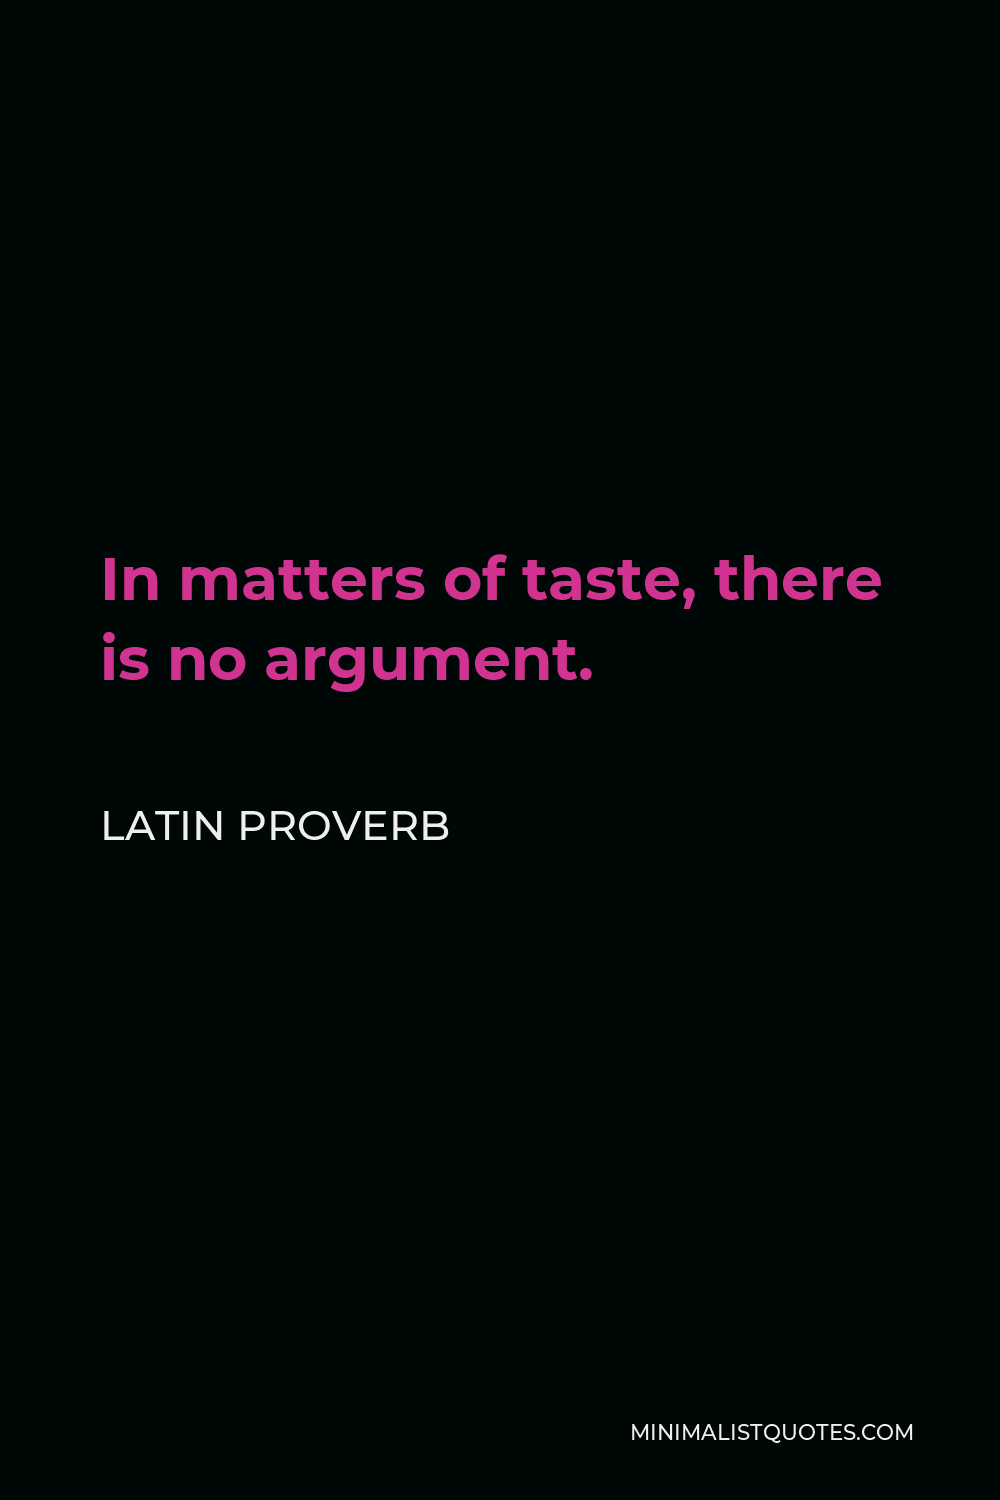 Latin Proverb Quote - In matters of taste, there is no argument.